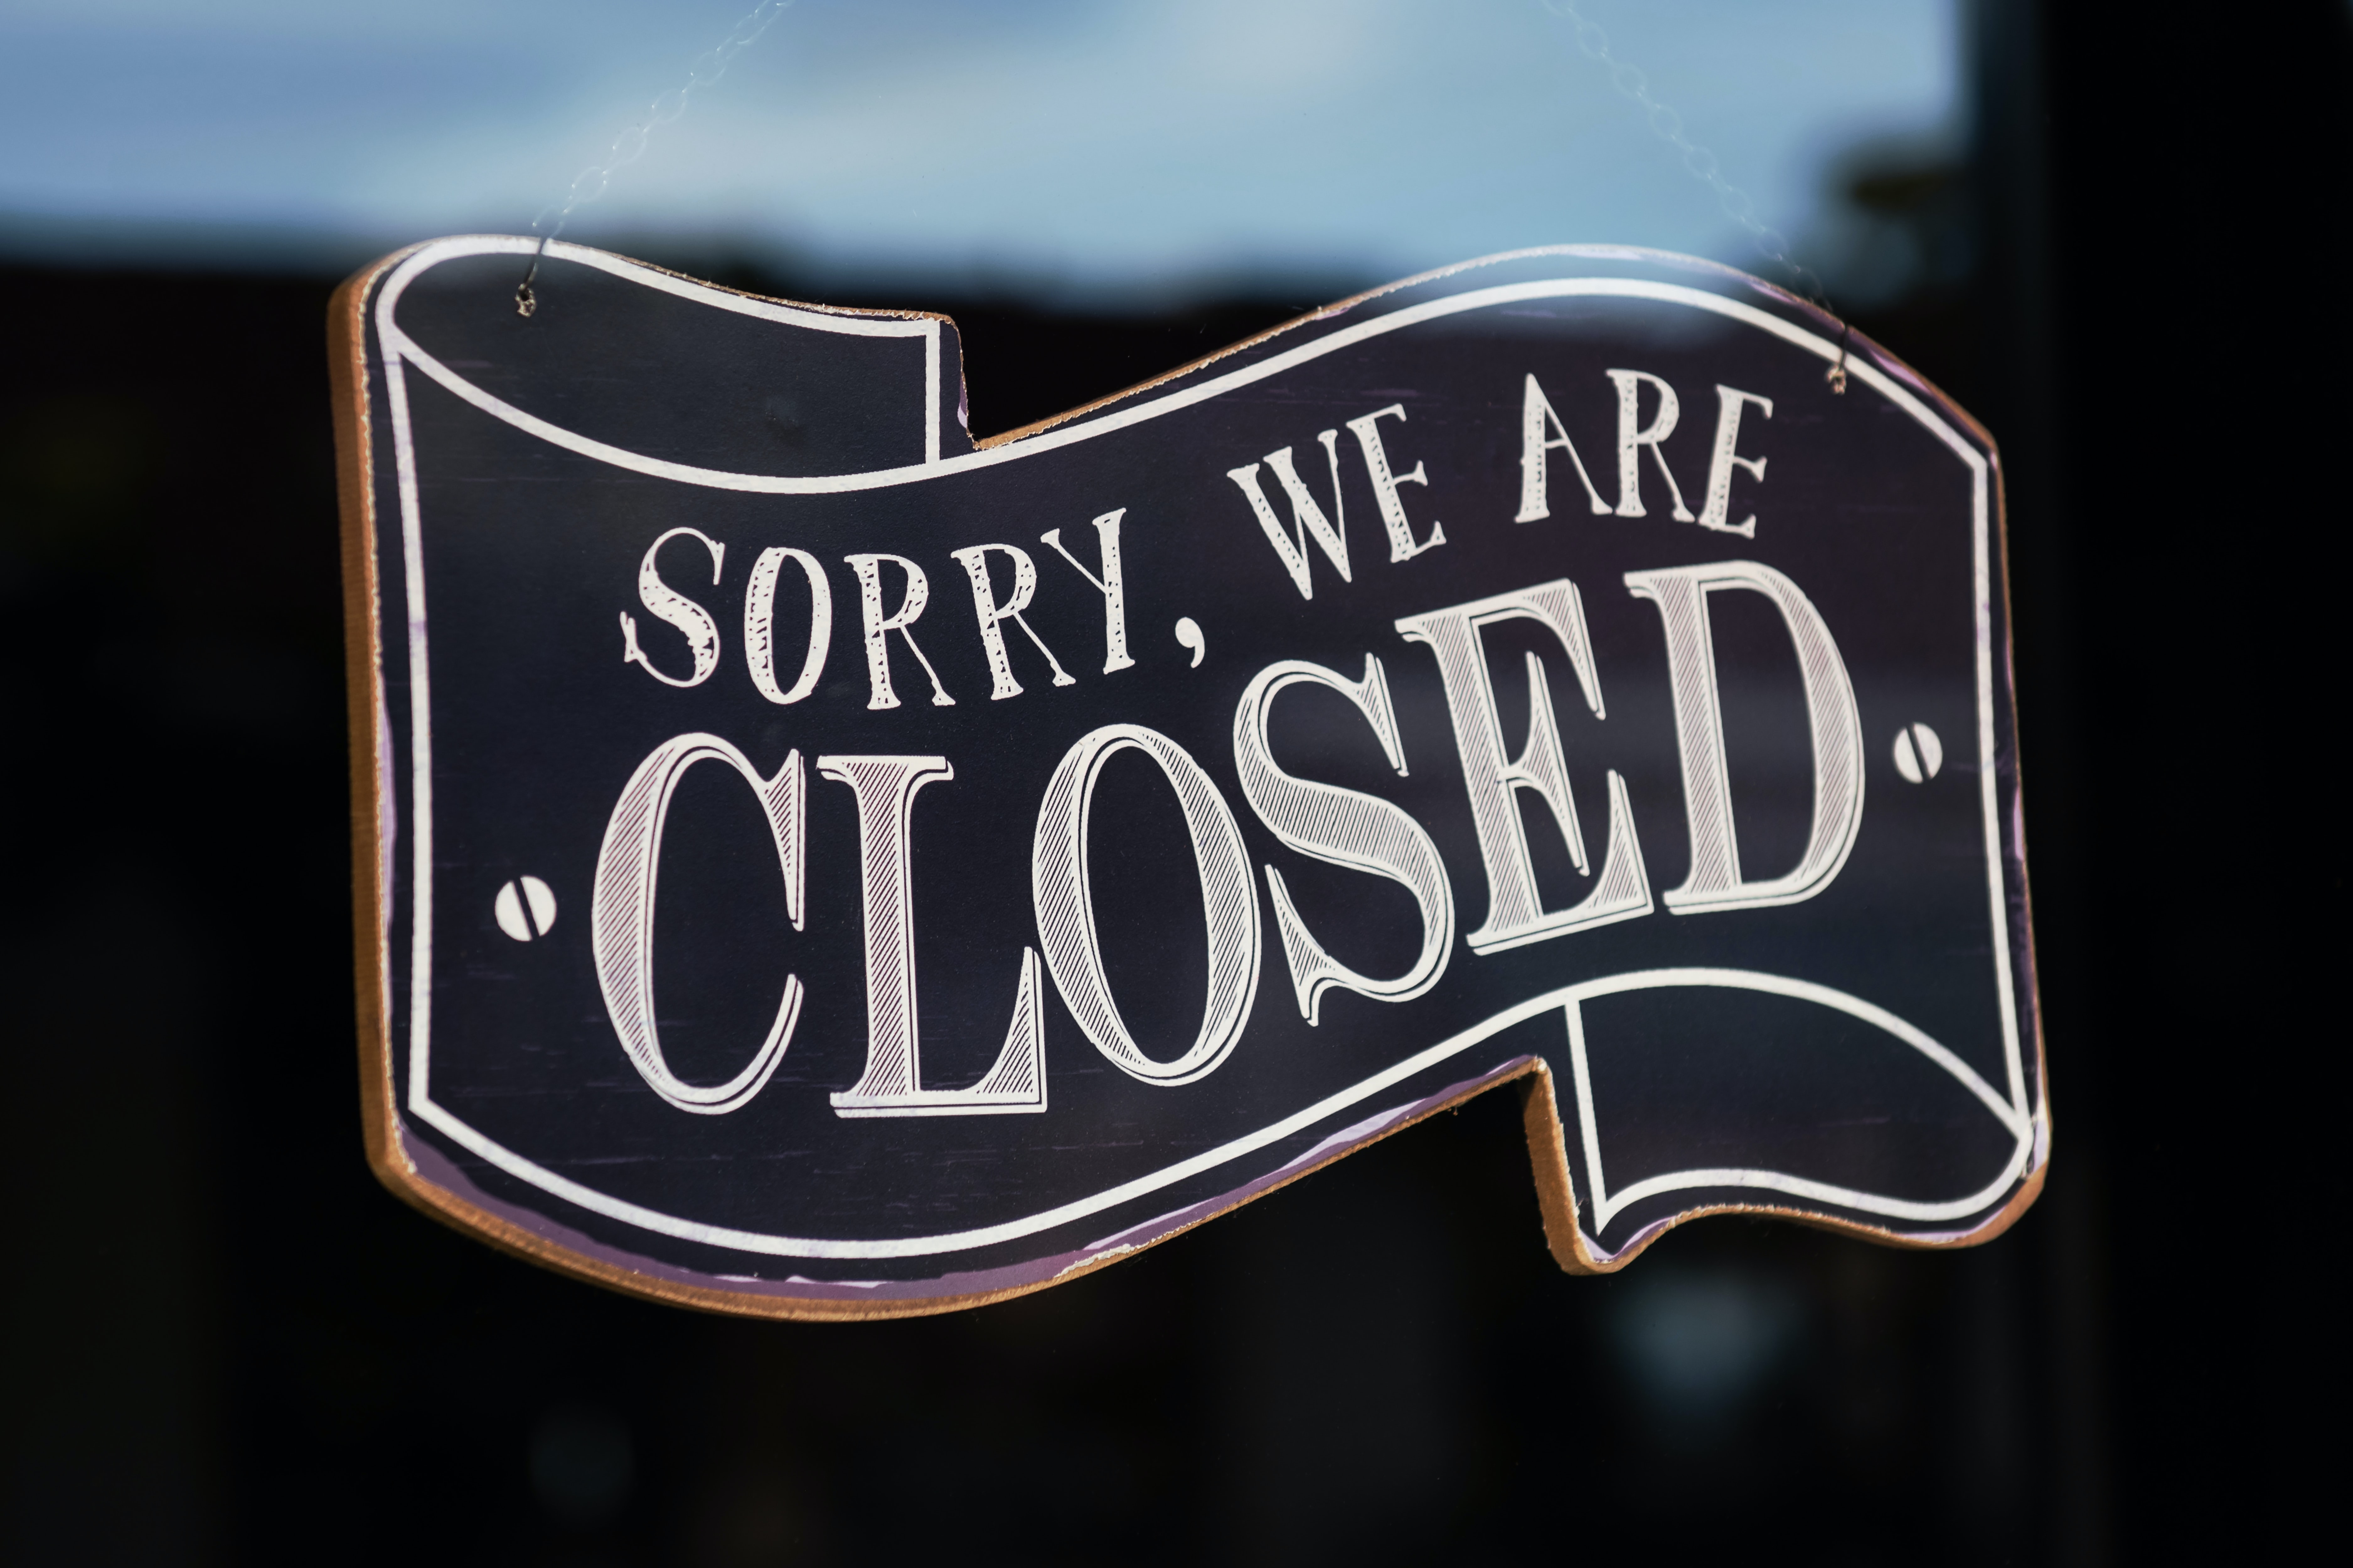 Stock Photo: Sorry we are Closed sign